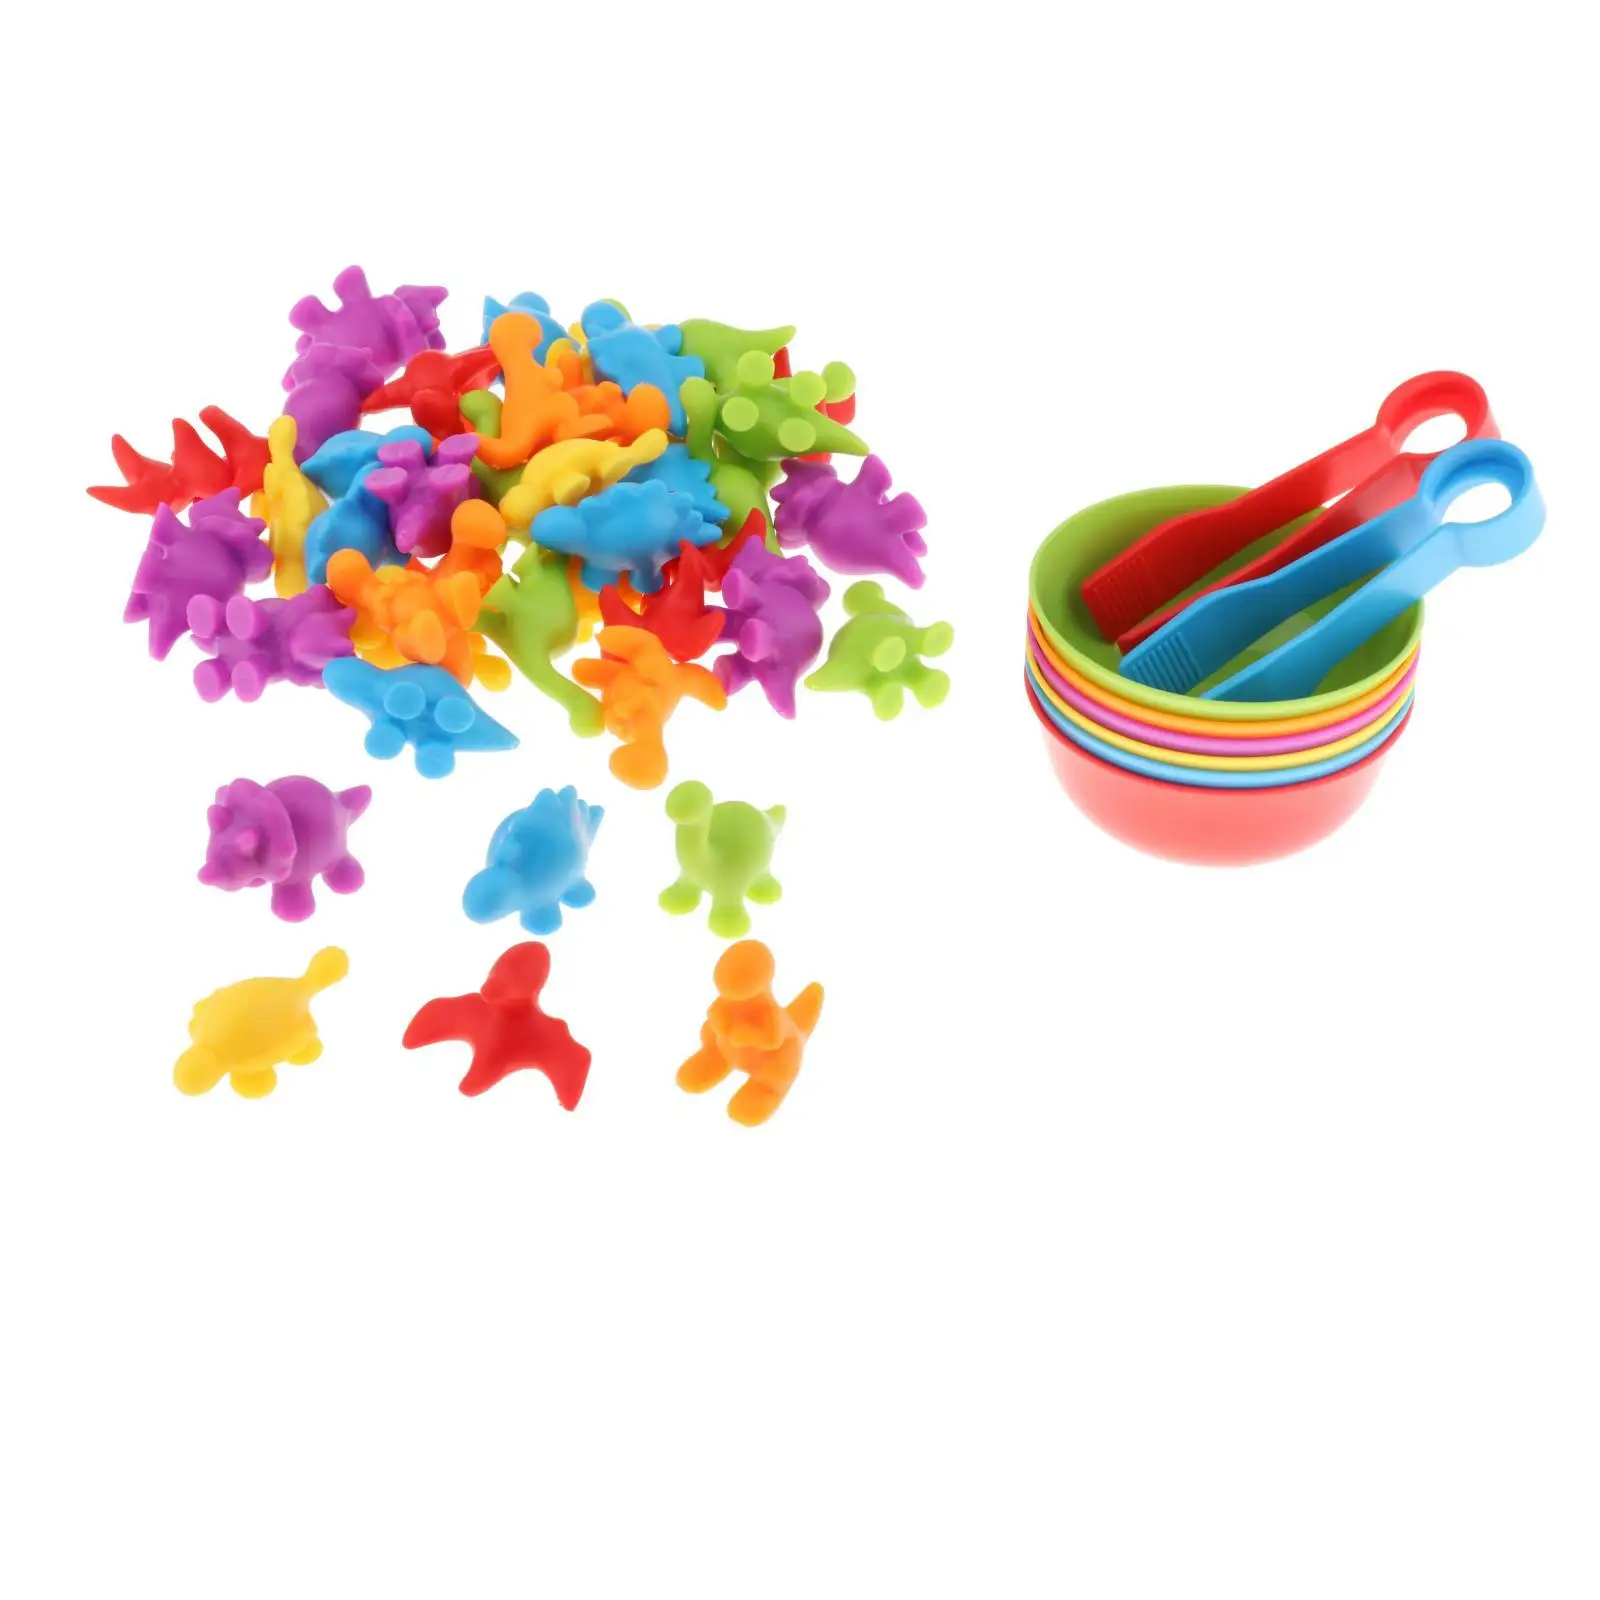 Educational Counting Colorful Sorting Toys with Bowls for Years Old